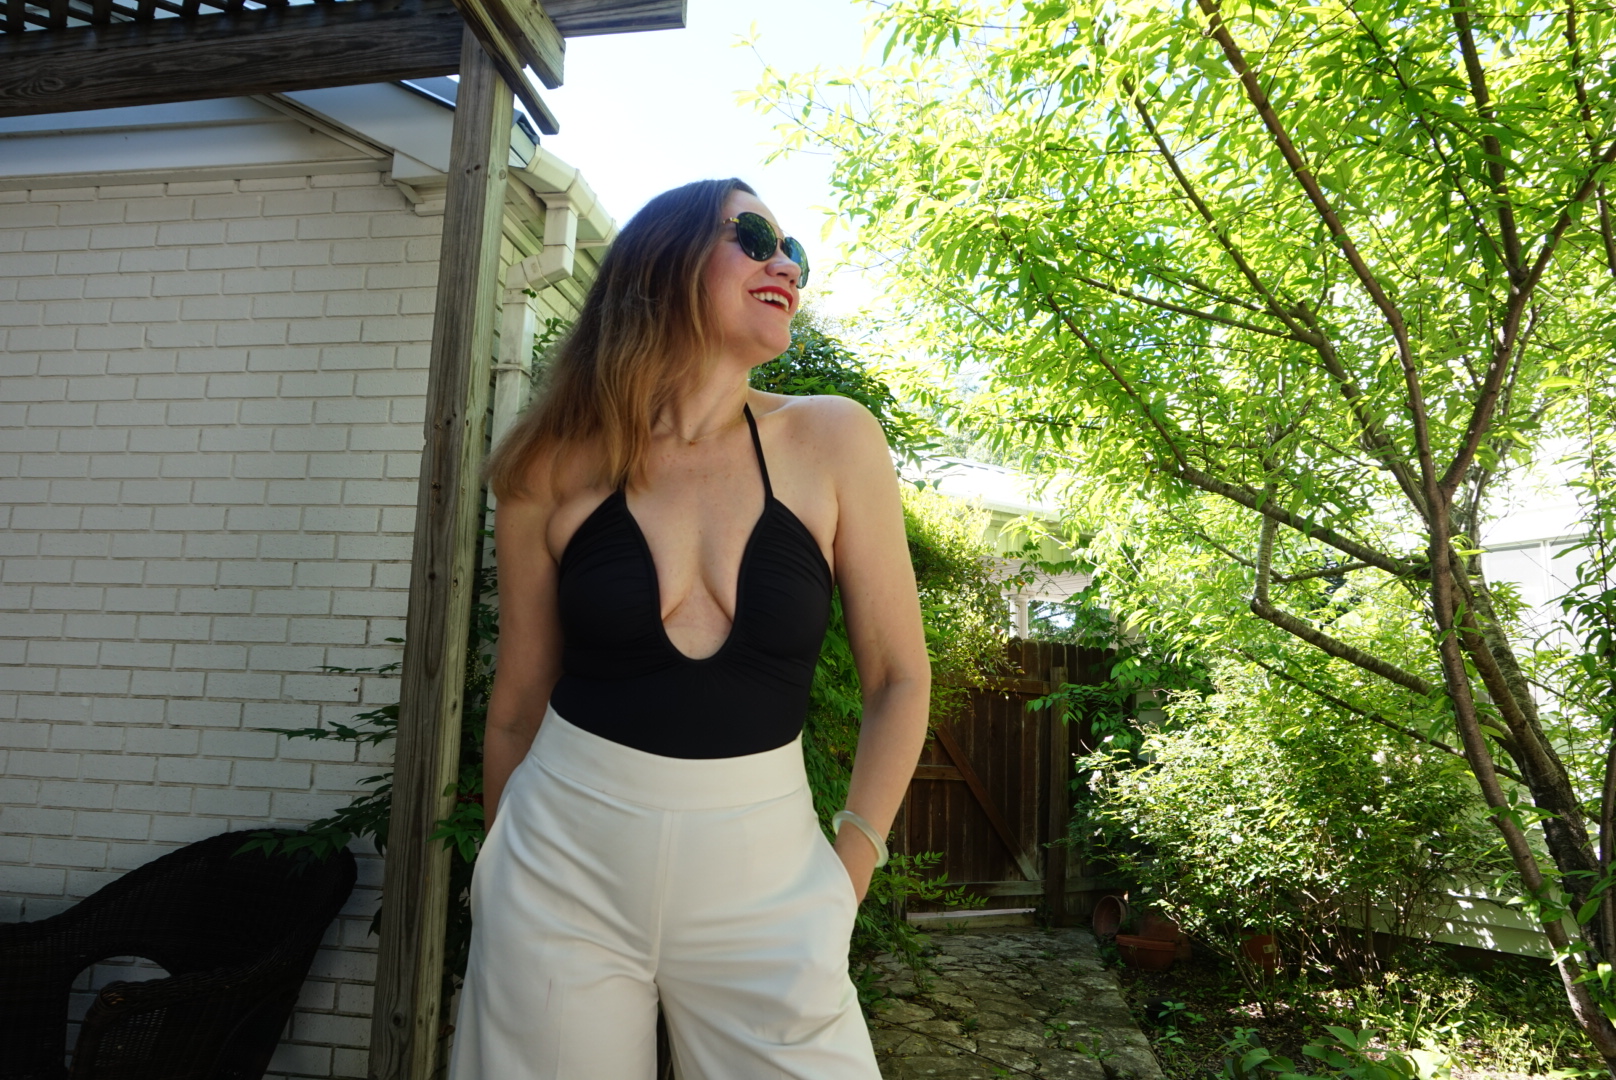 a woman in a low cut black swim suit and white pants in a garden